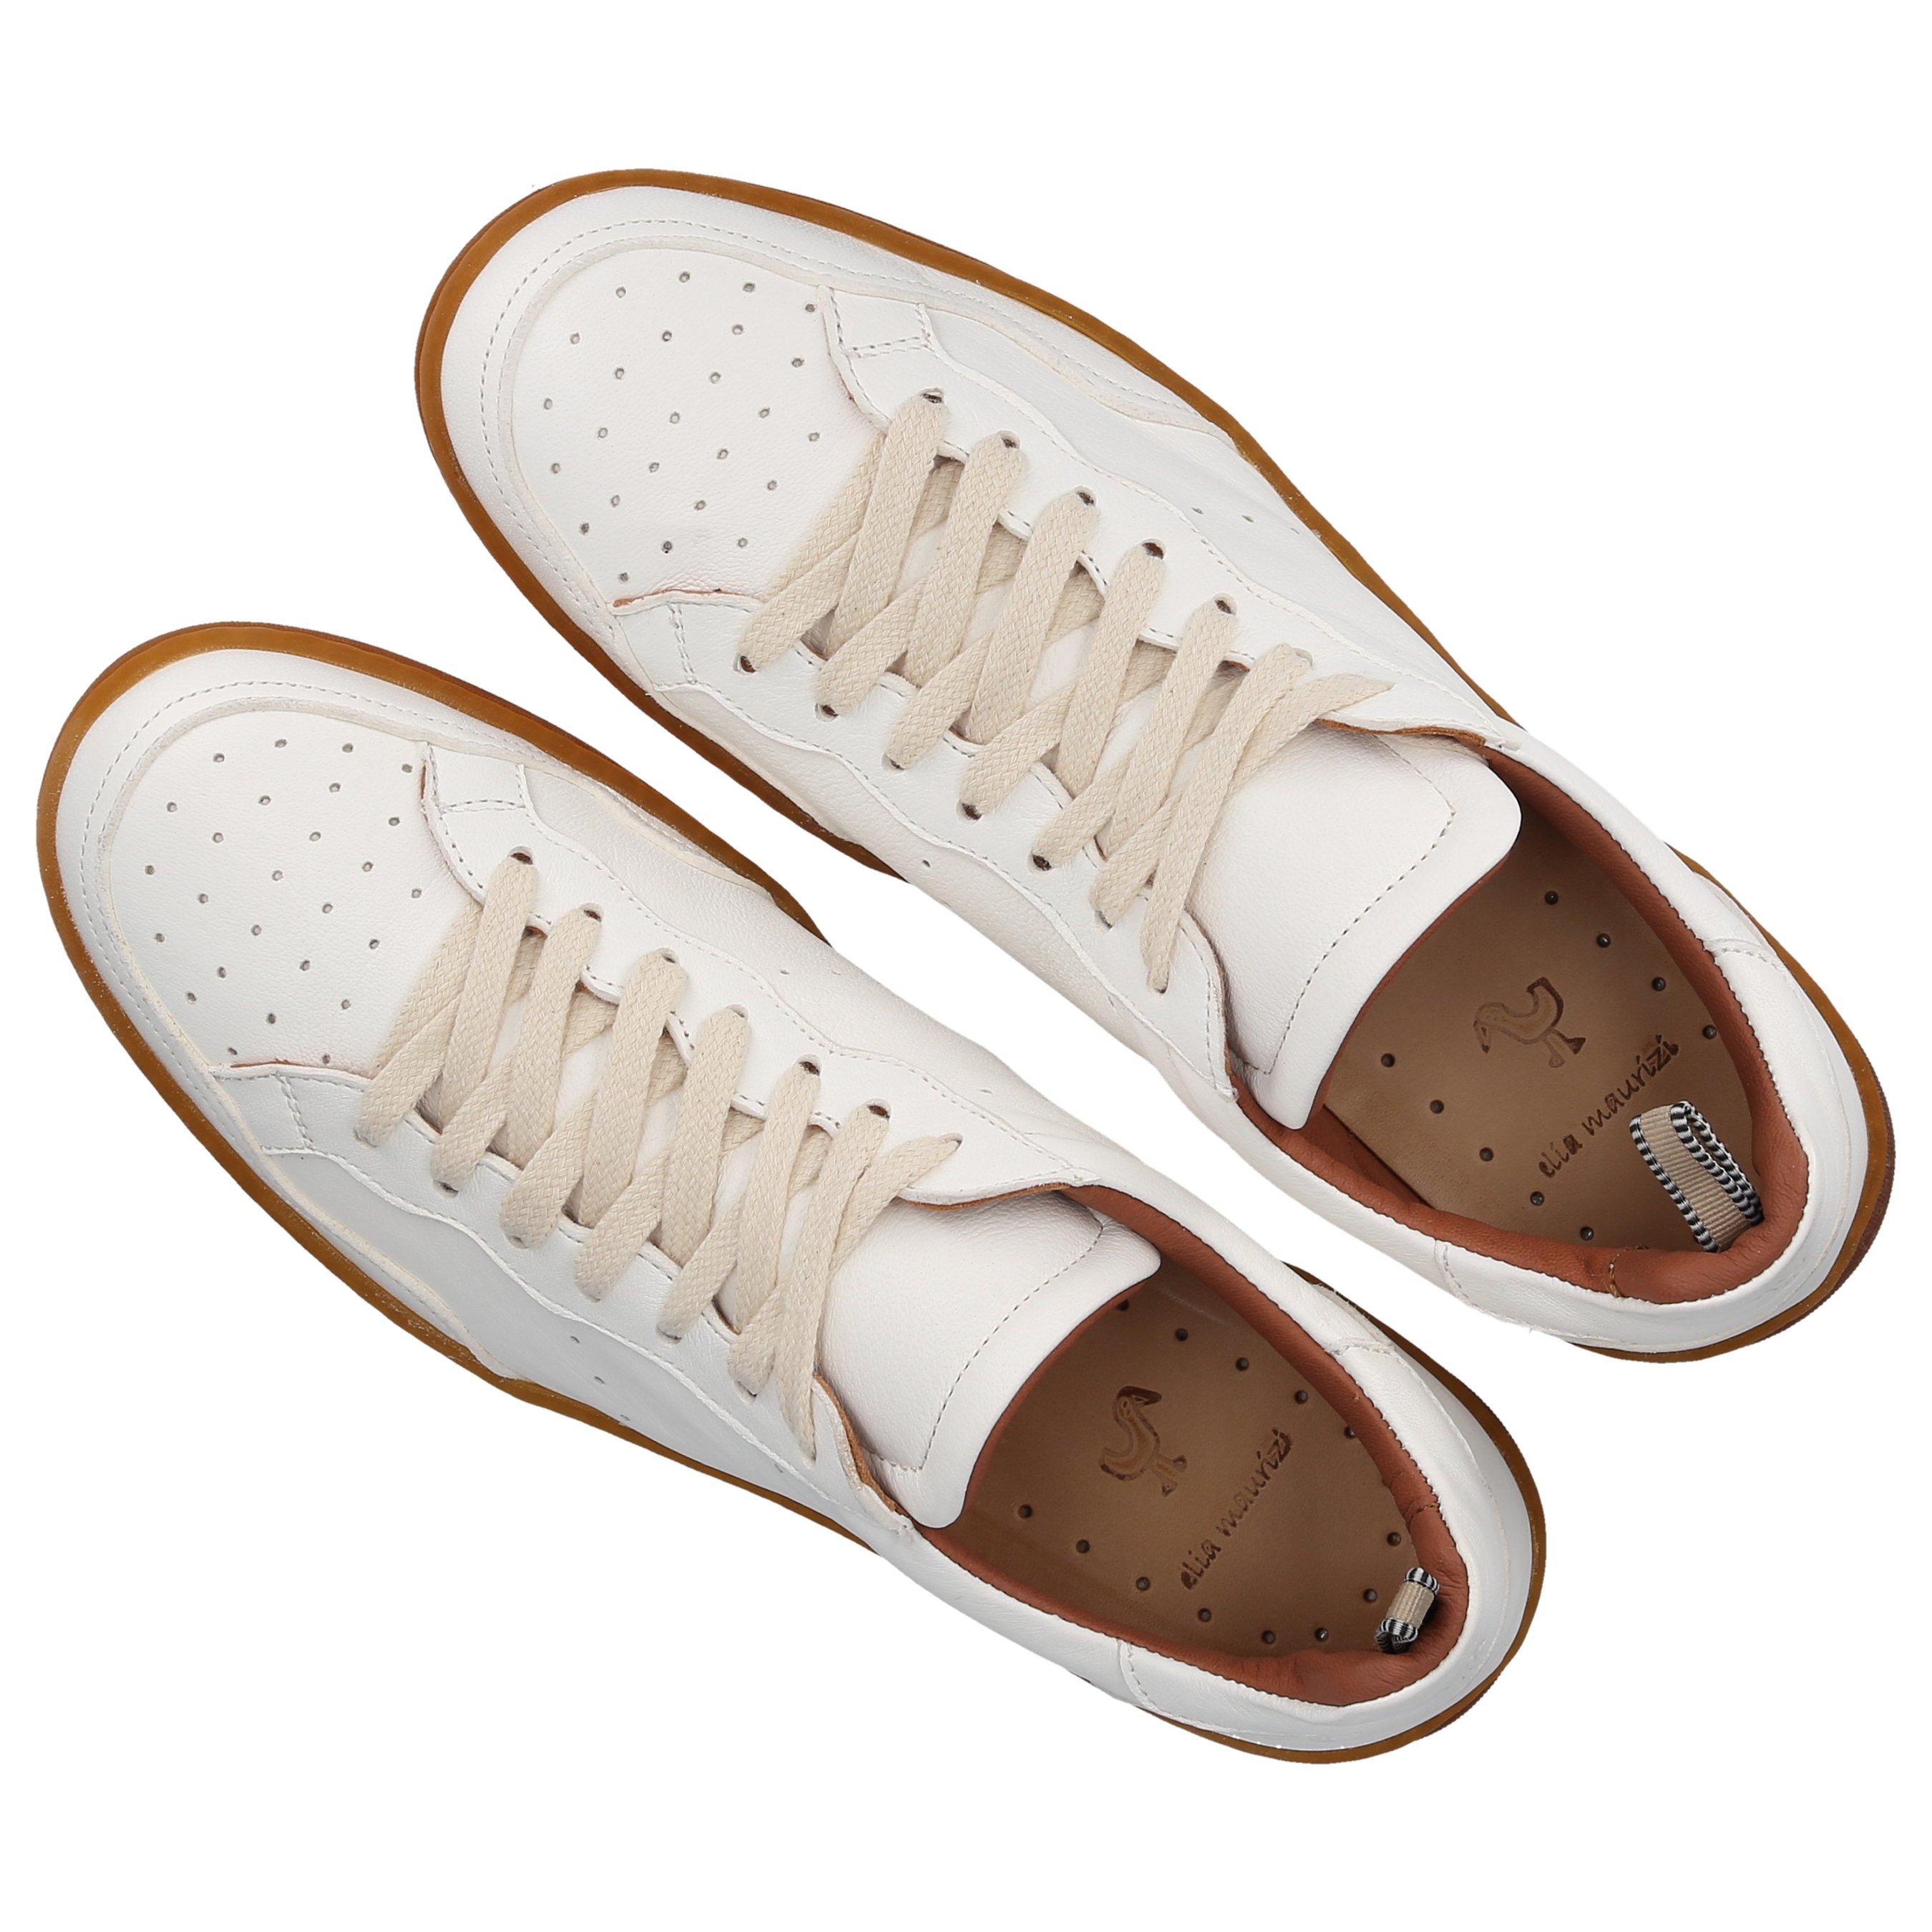 Elia Maurizi Low-top Sneakers 1166v9 Calfskin in White | Lyst